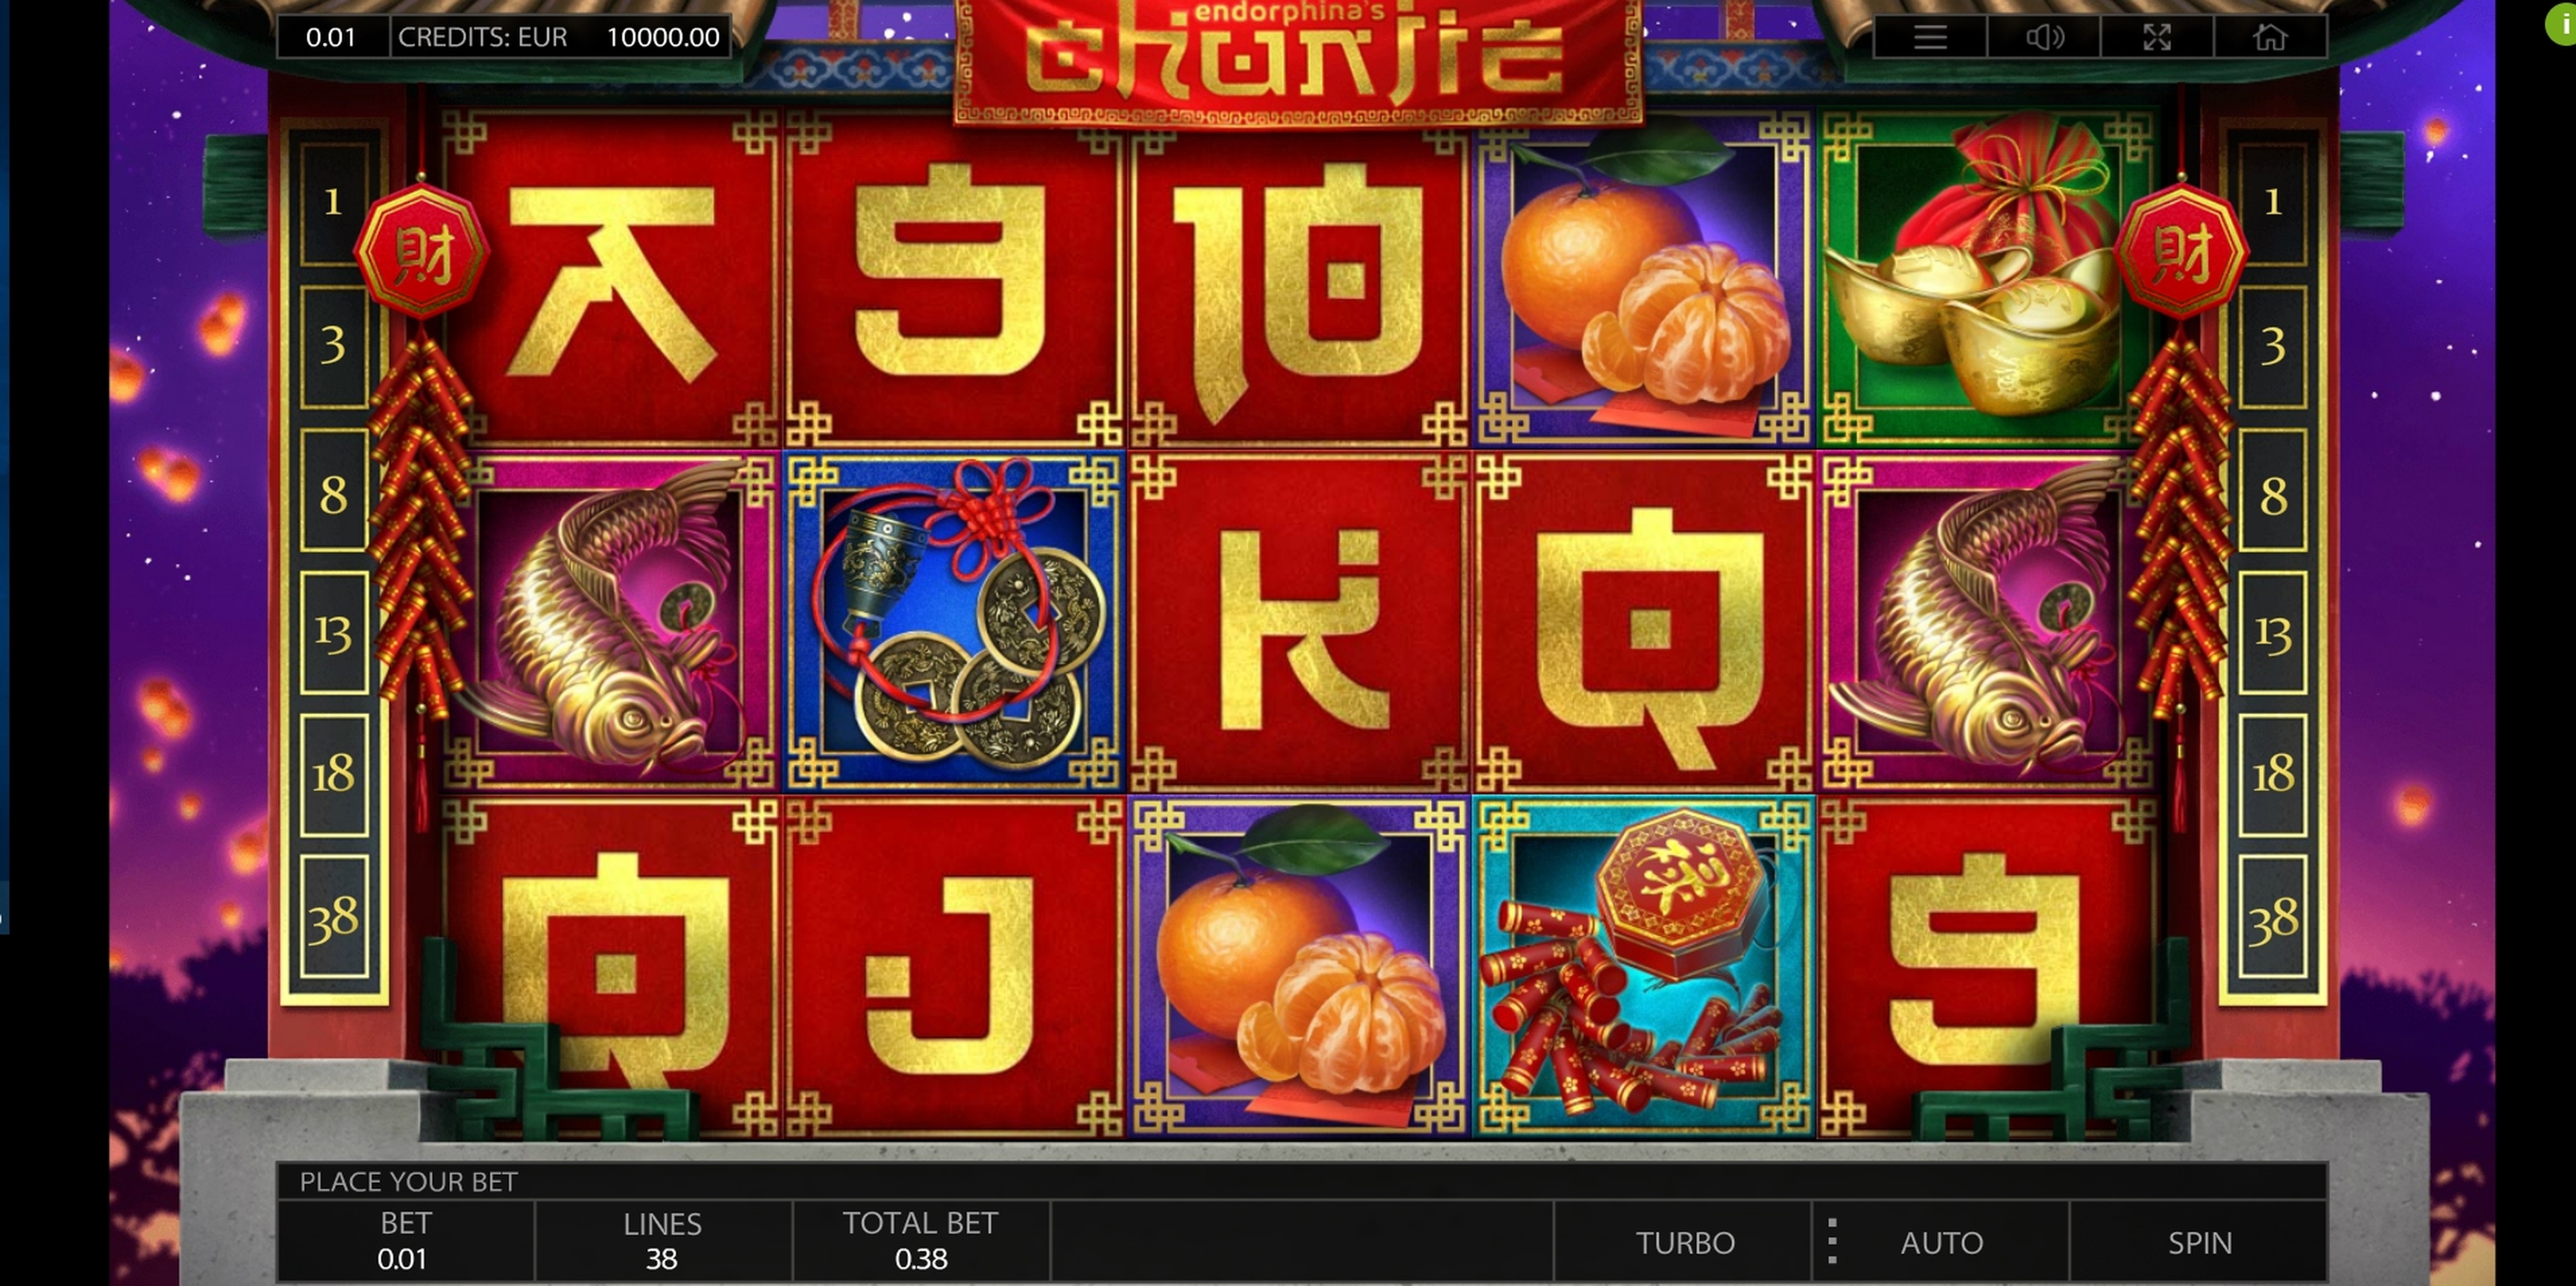 Reels in Chunjie Slot Game by Endorphina